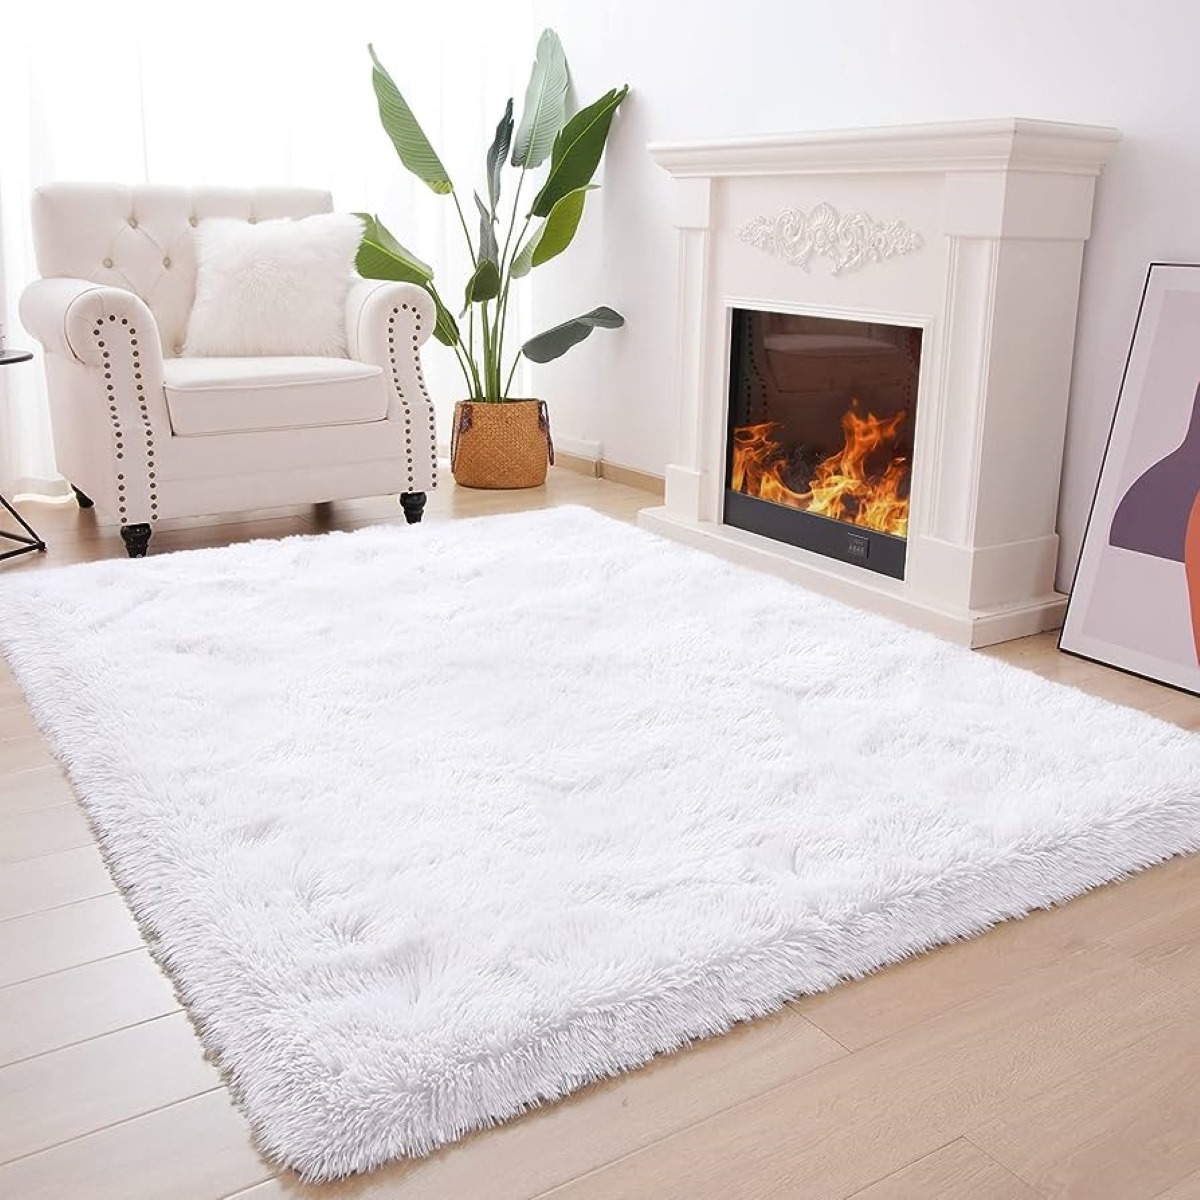 How To Keep White Rugs Clean